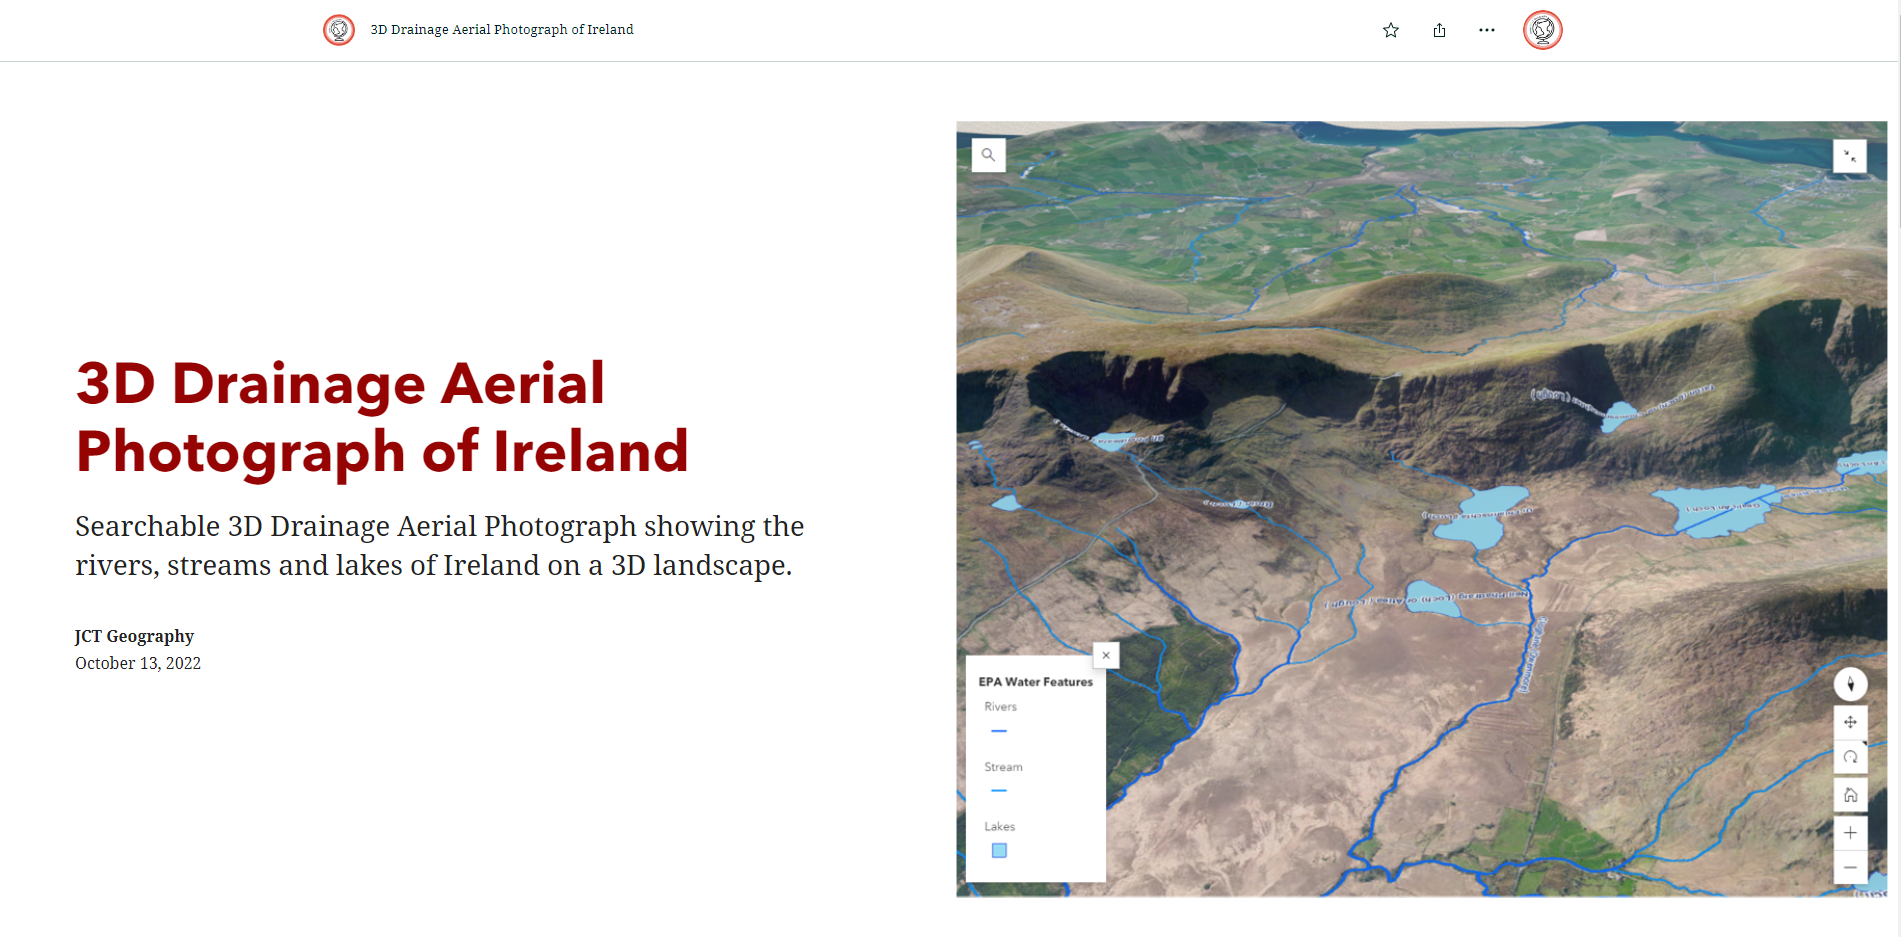 3D Drainage Aerial Photograph of Ireland